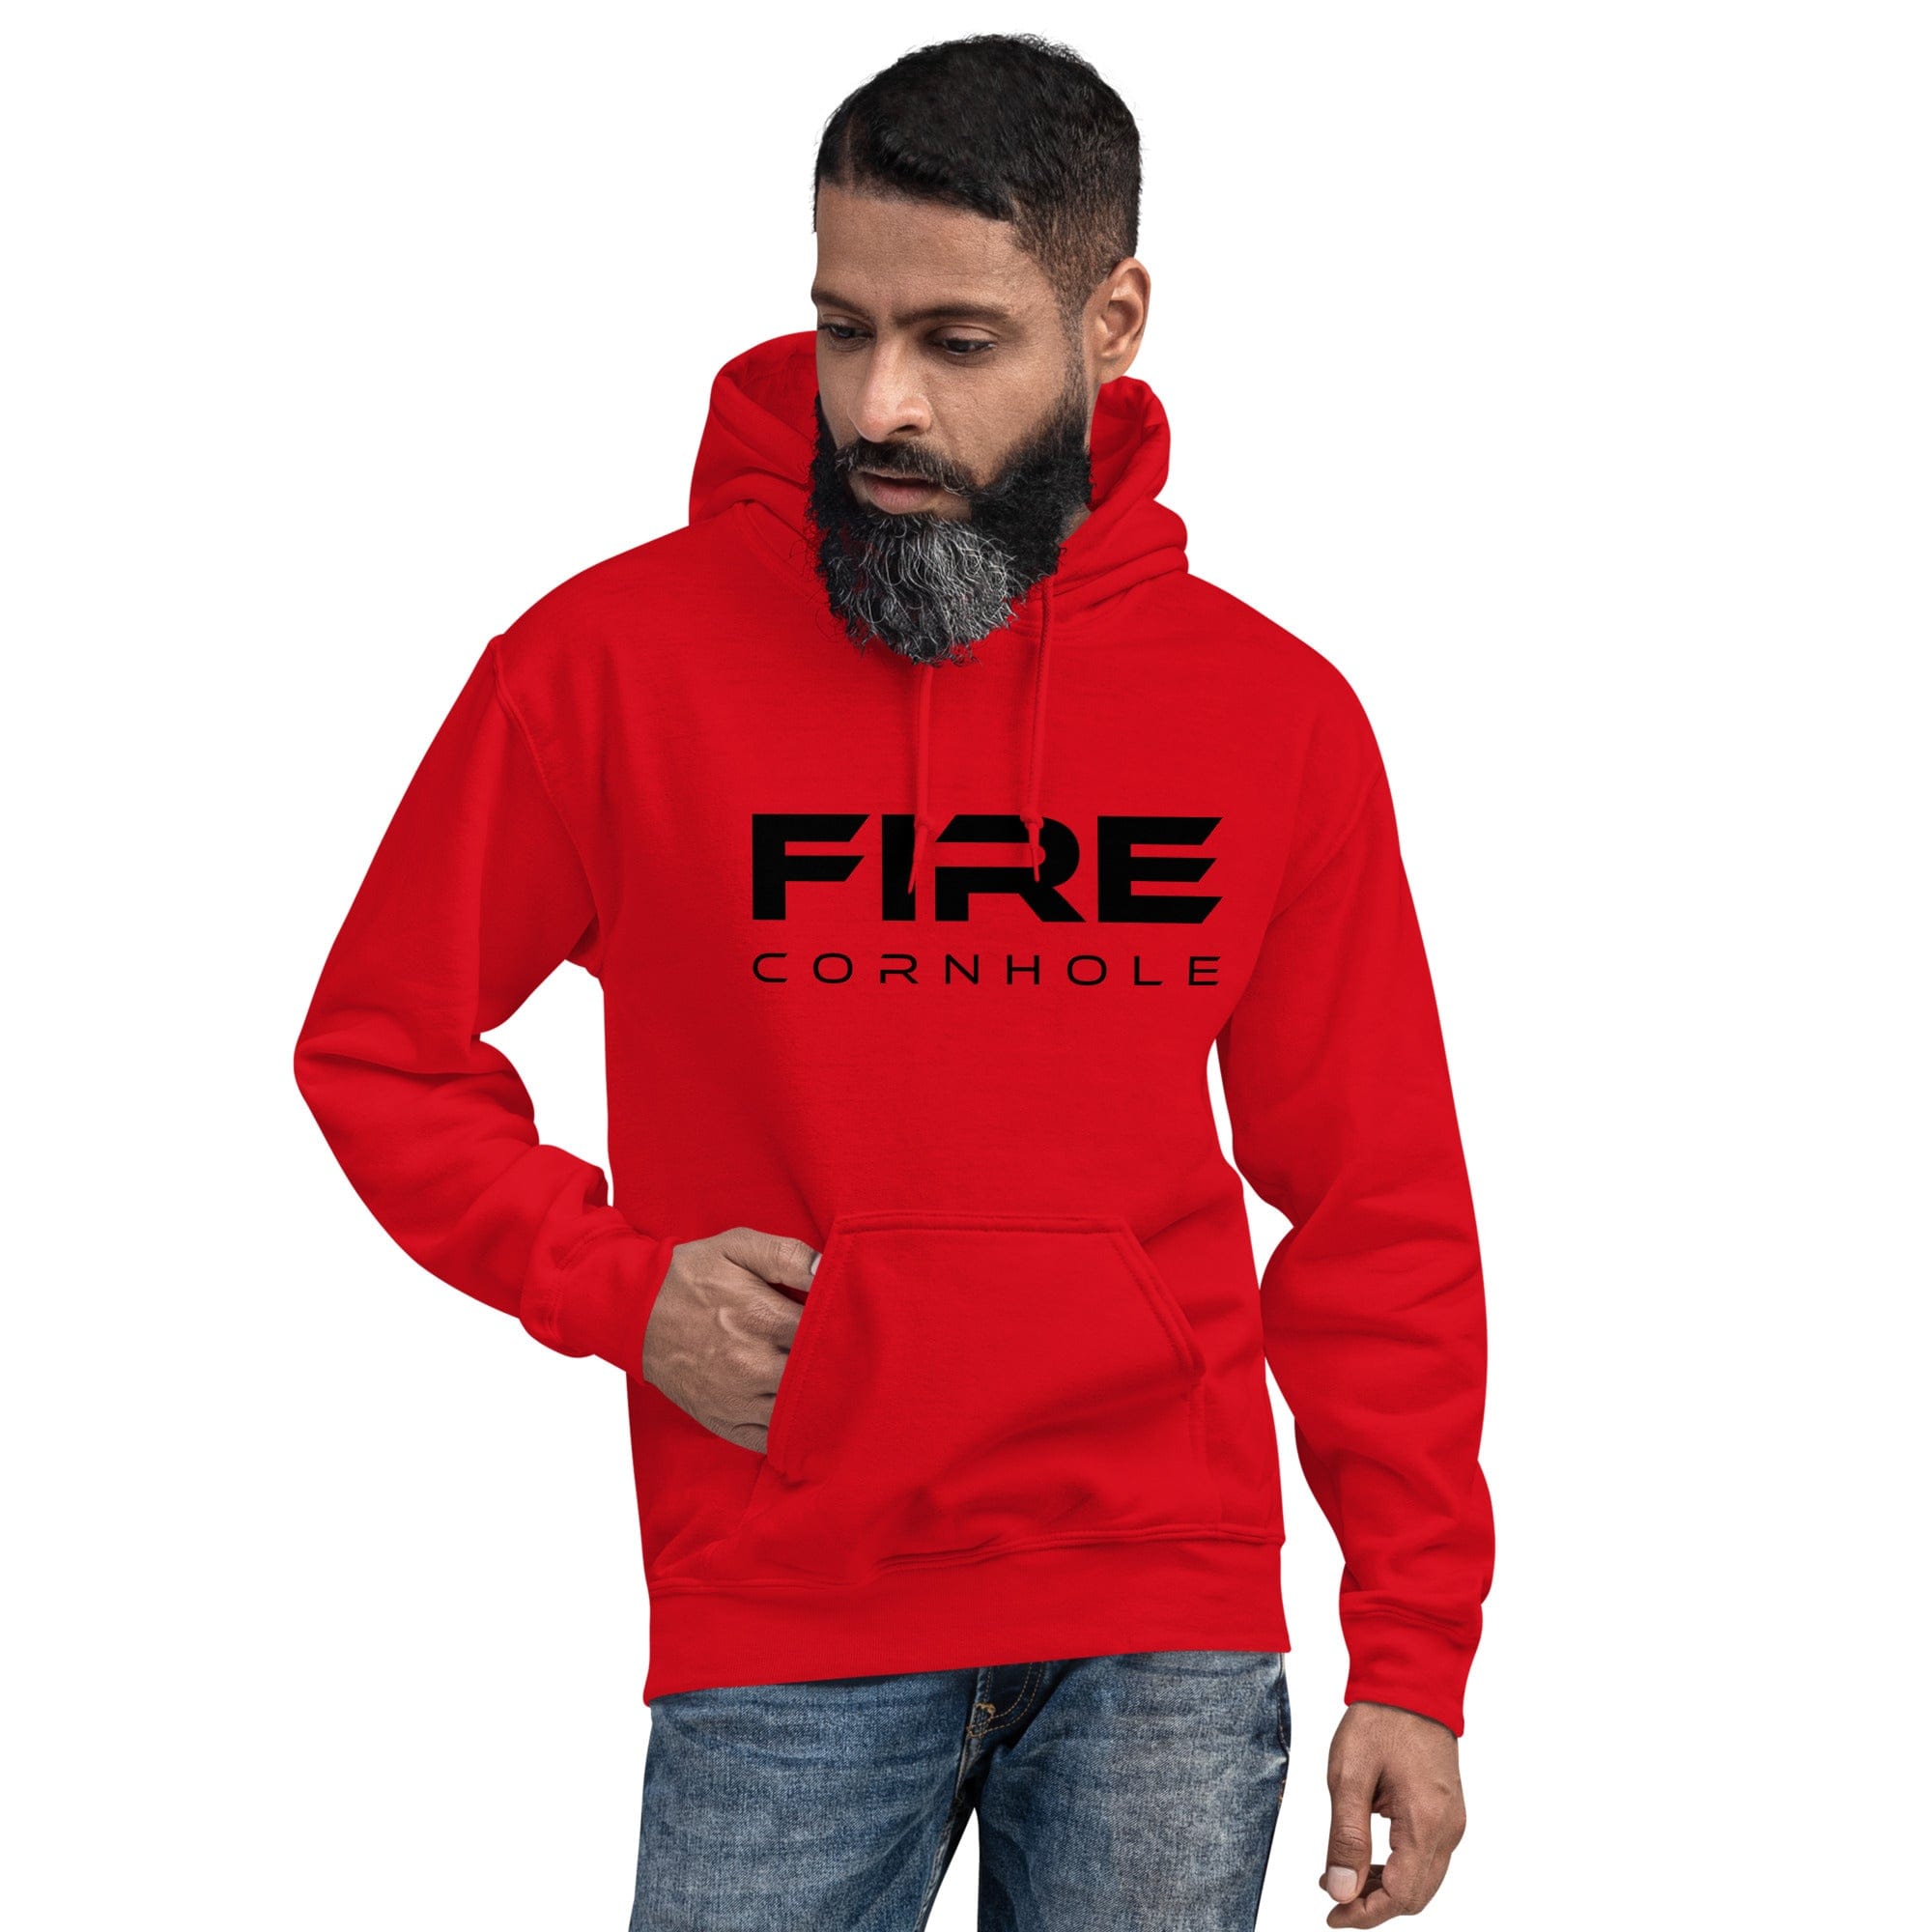 Red unisex cotton hoodie with Fire Cornhole logo in black